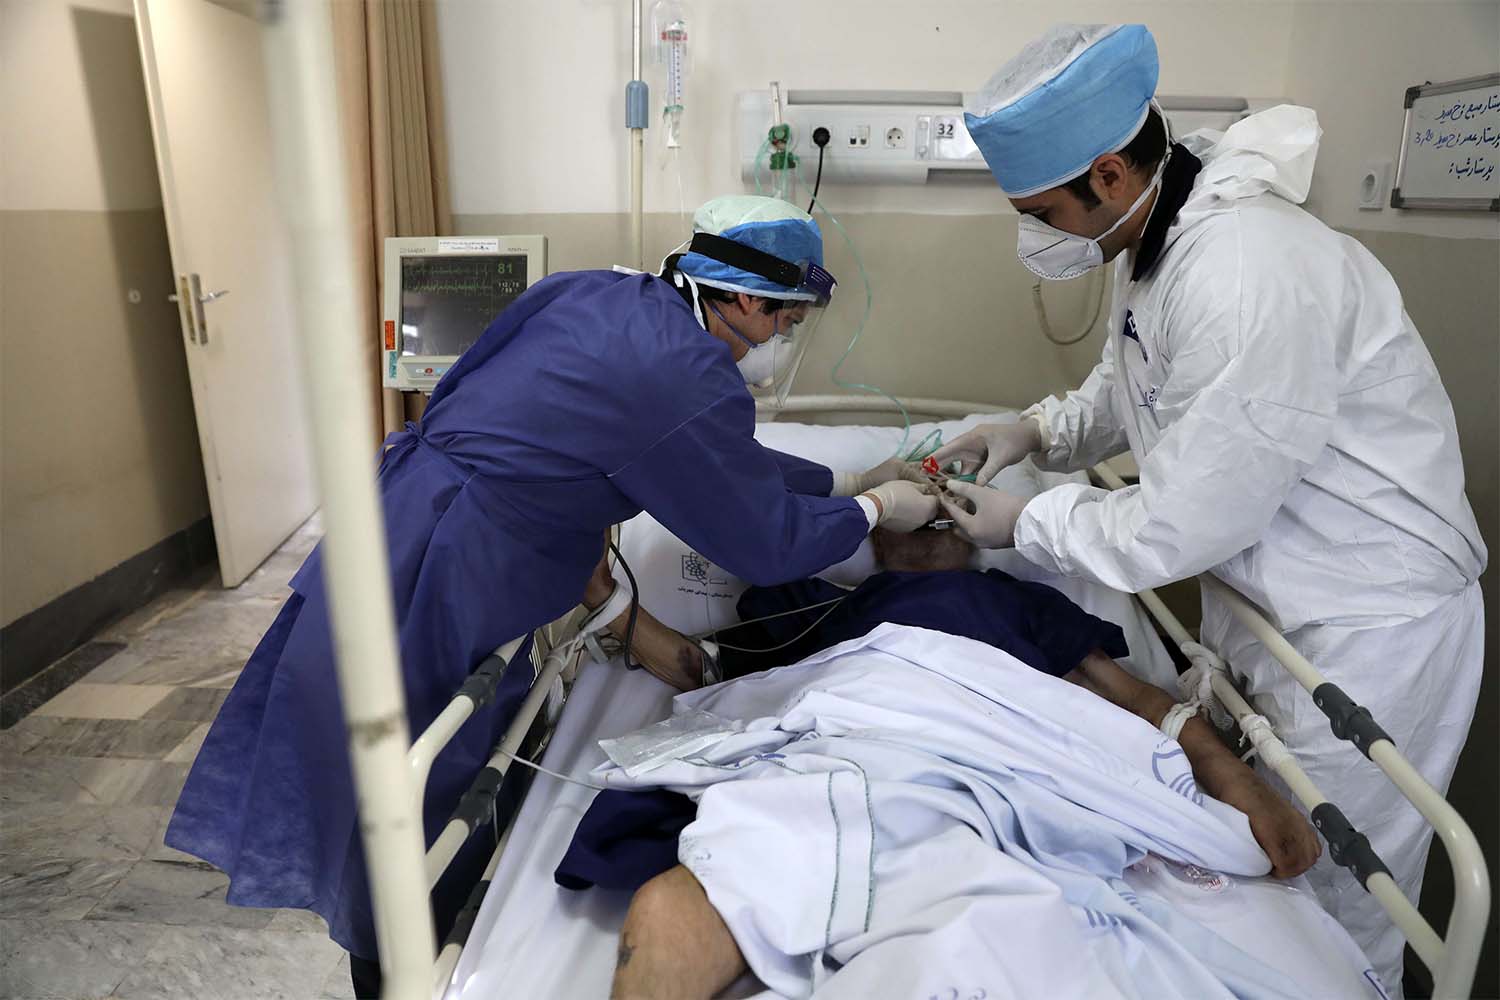 It is Iran's highest single-day virus fatality rate since April 11